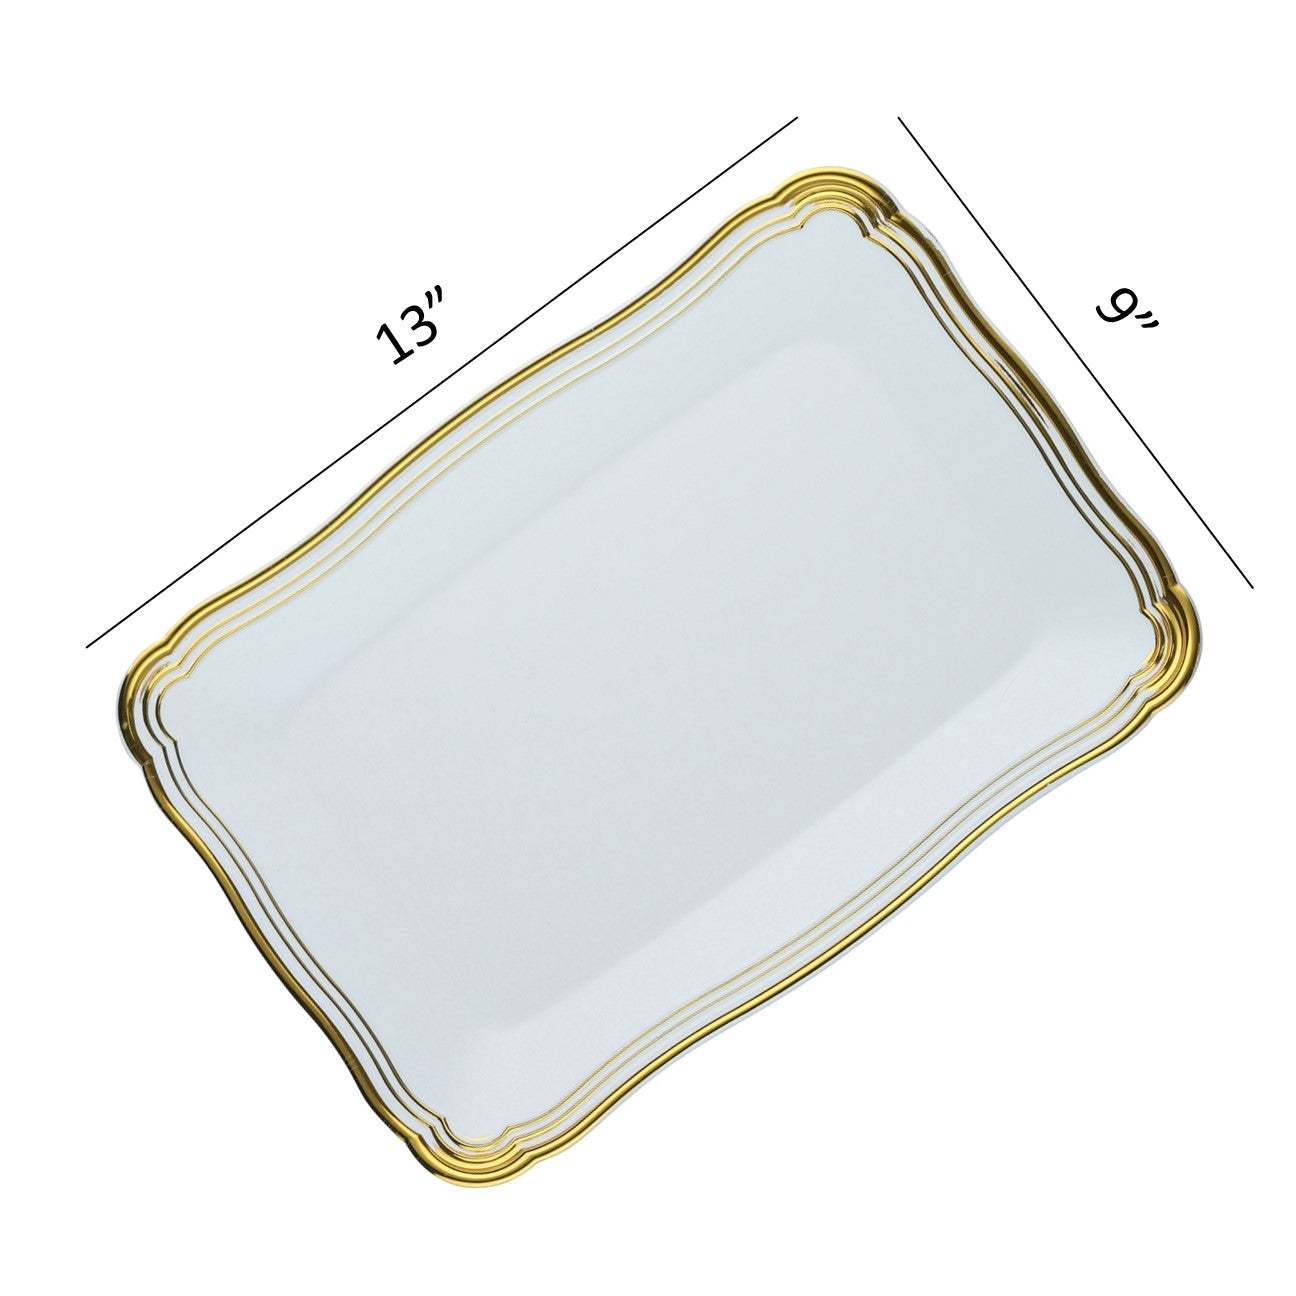 9 X 13 Inch Rectangle White And Gold Rim Plastic Serving Tray – Posh Setting